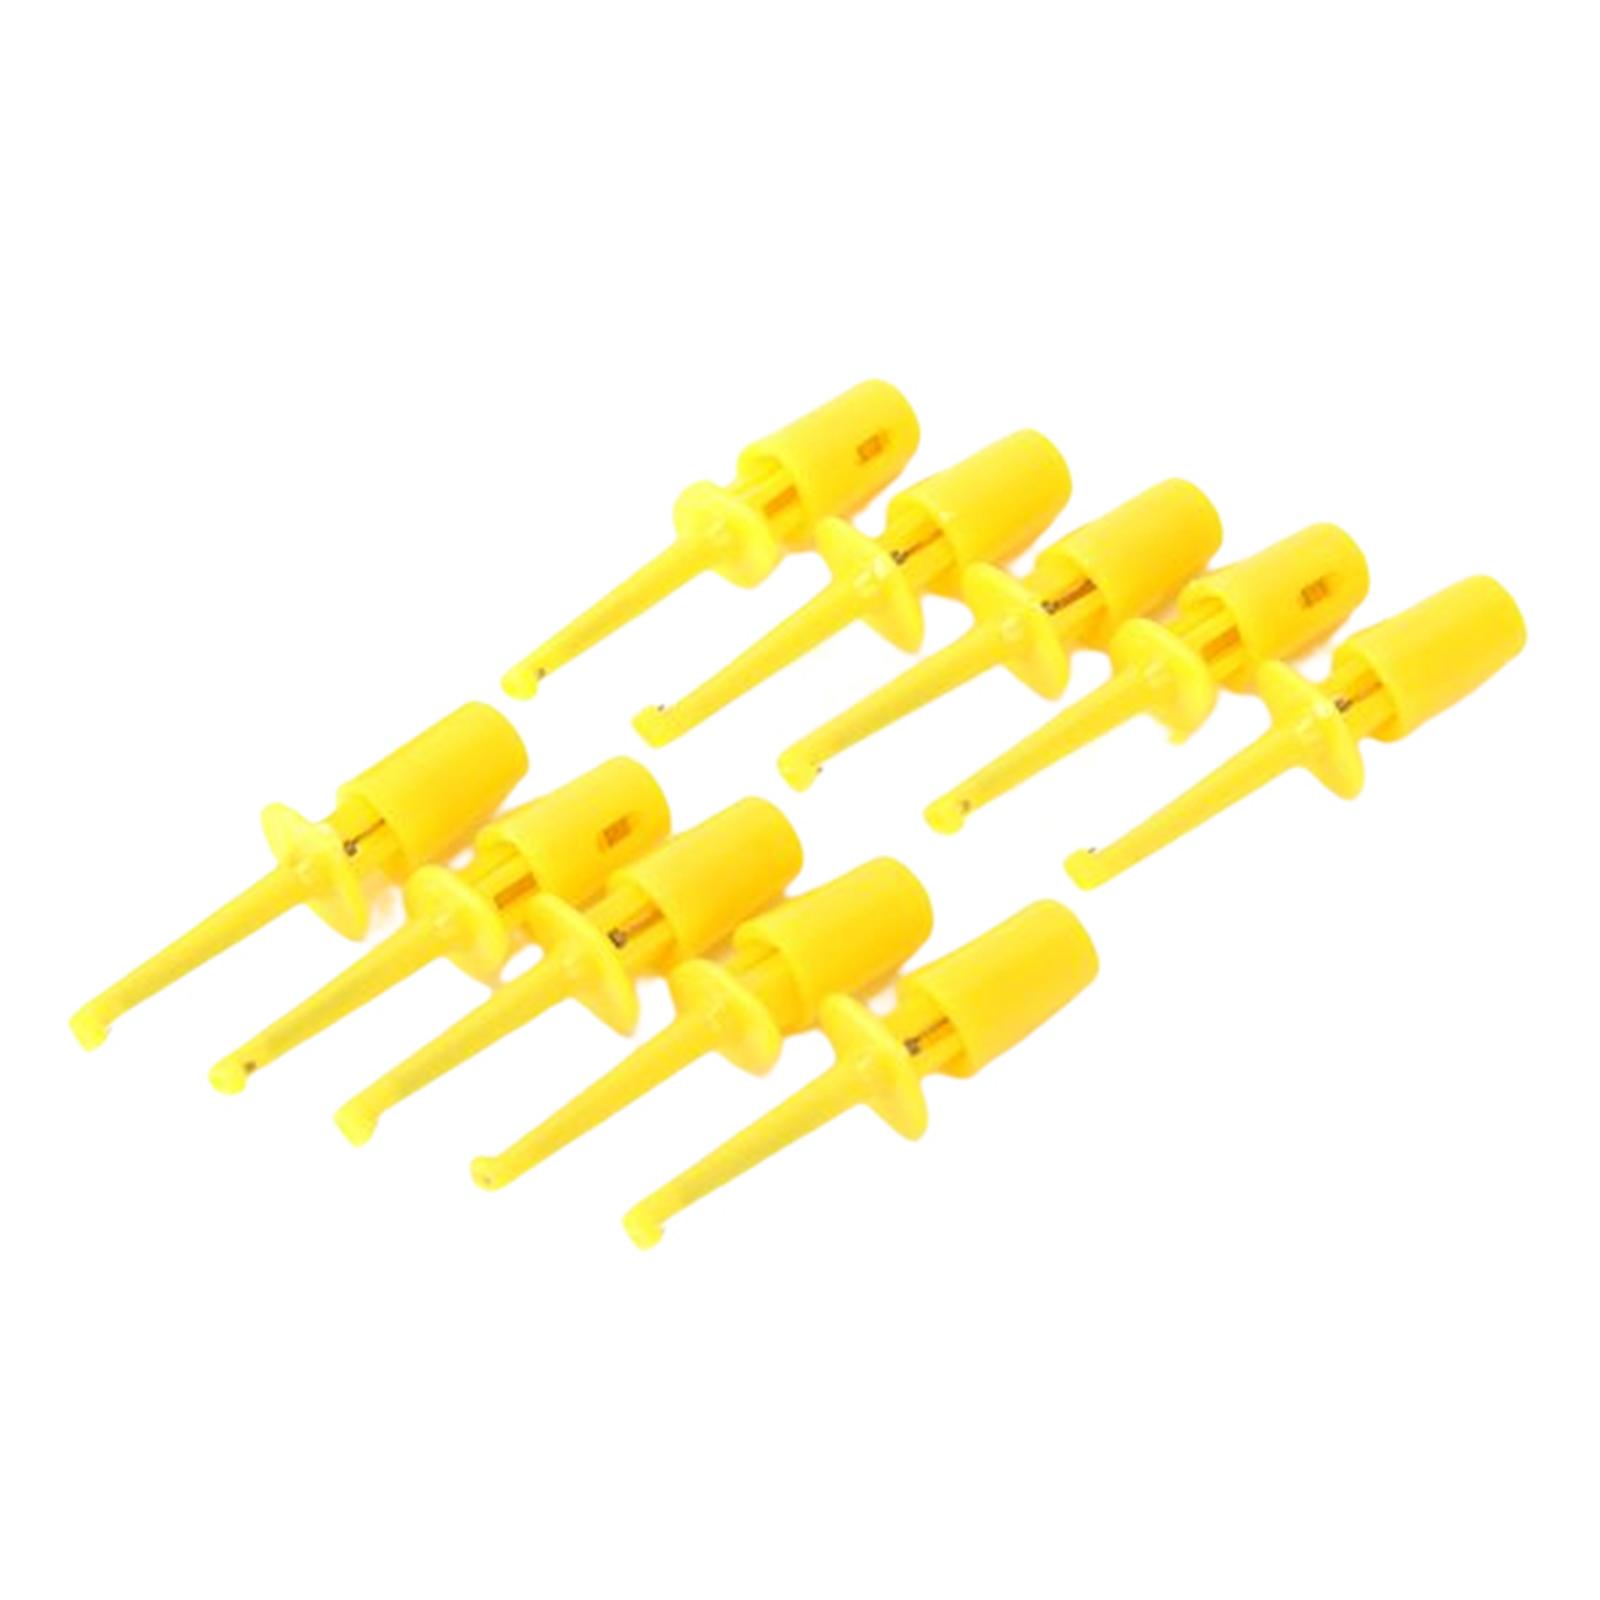 10 x Mini Test Hook Probe Spring Clip for PCB SMD IC Yellow